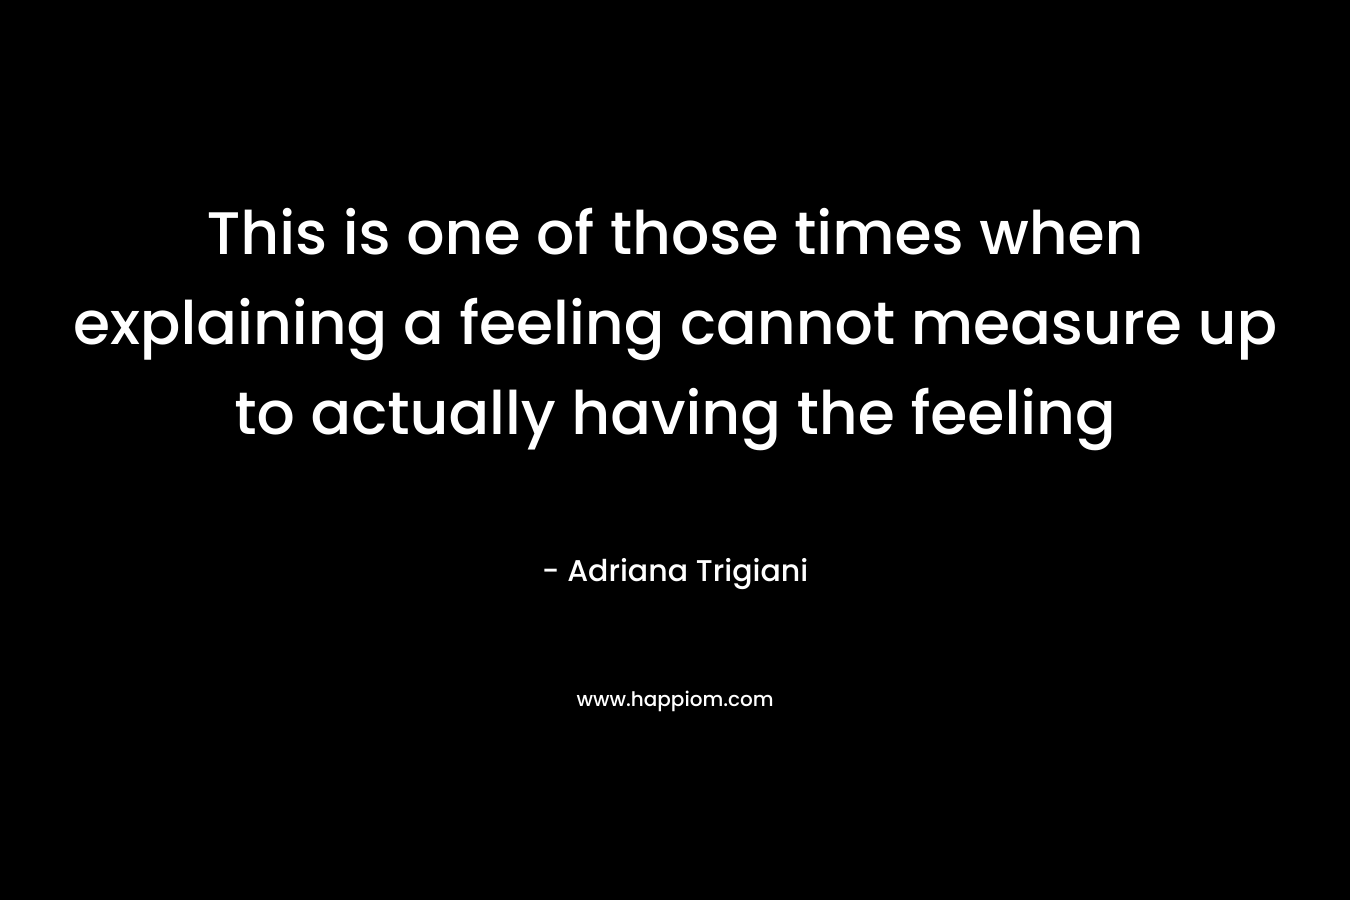 This is one of those times when explaining a feeling cannot measure up to actually having the feeling – Adriana Trigiani